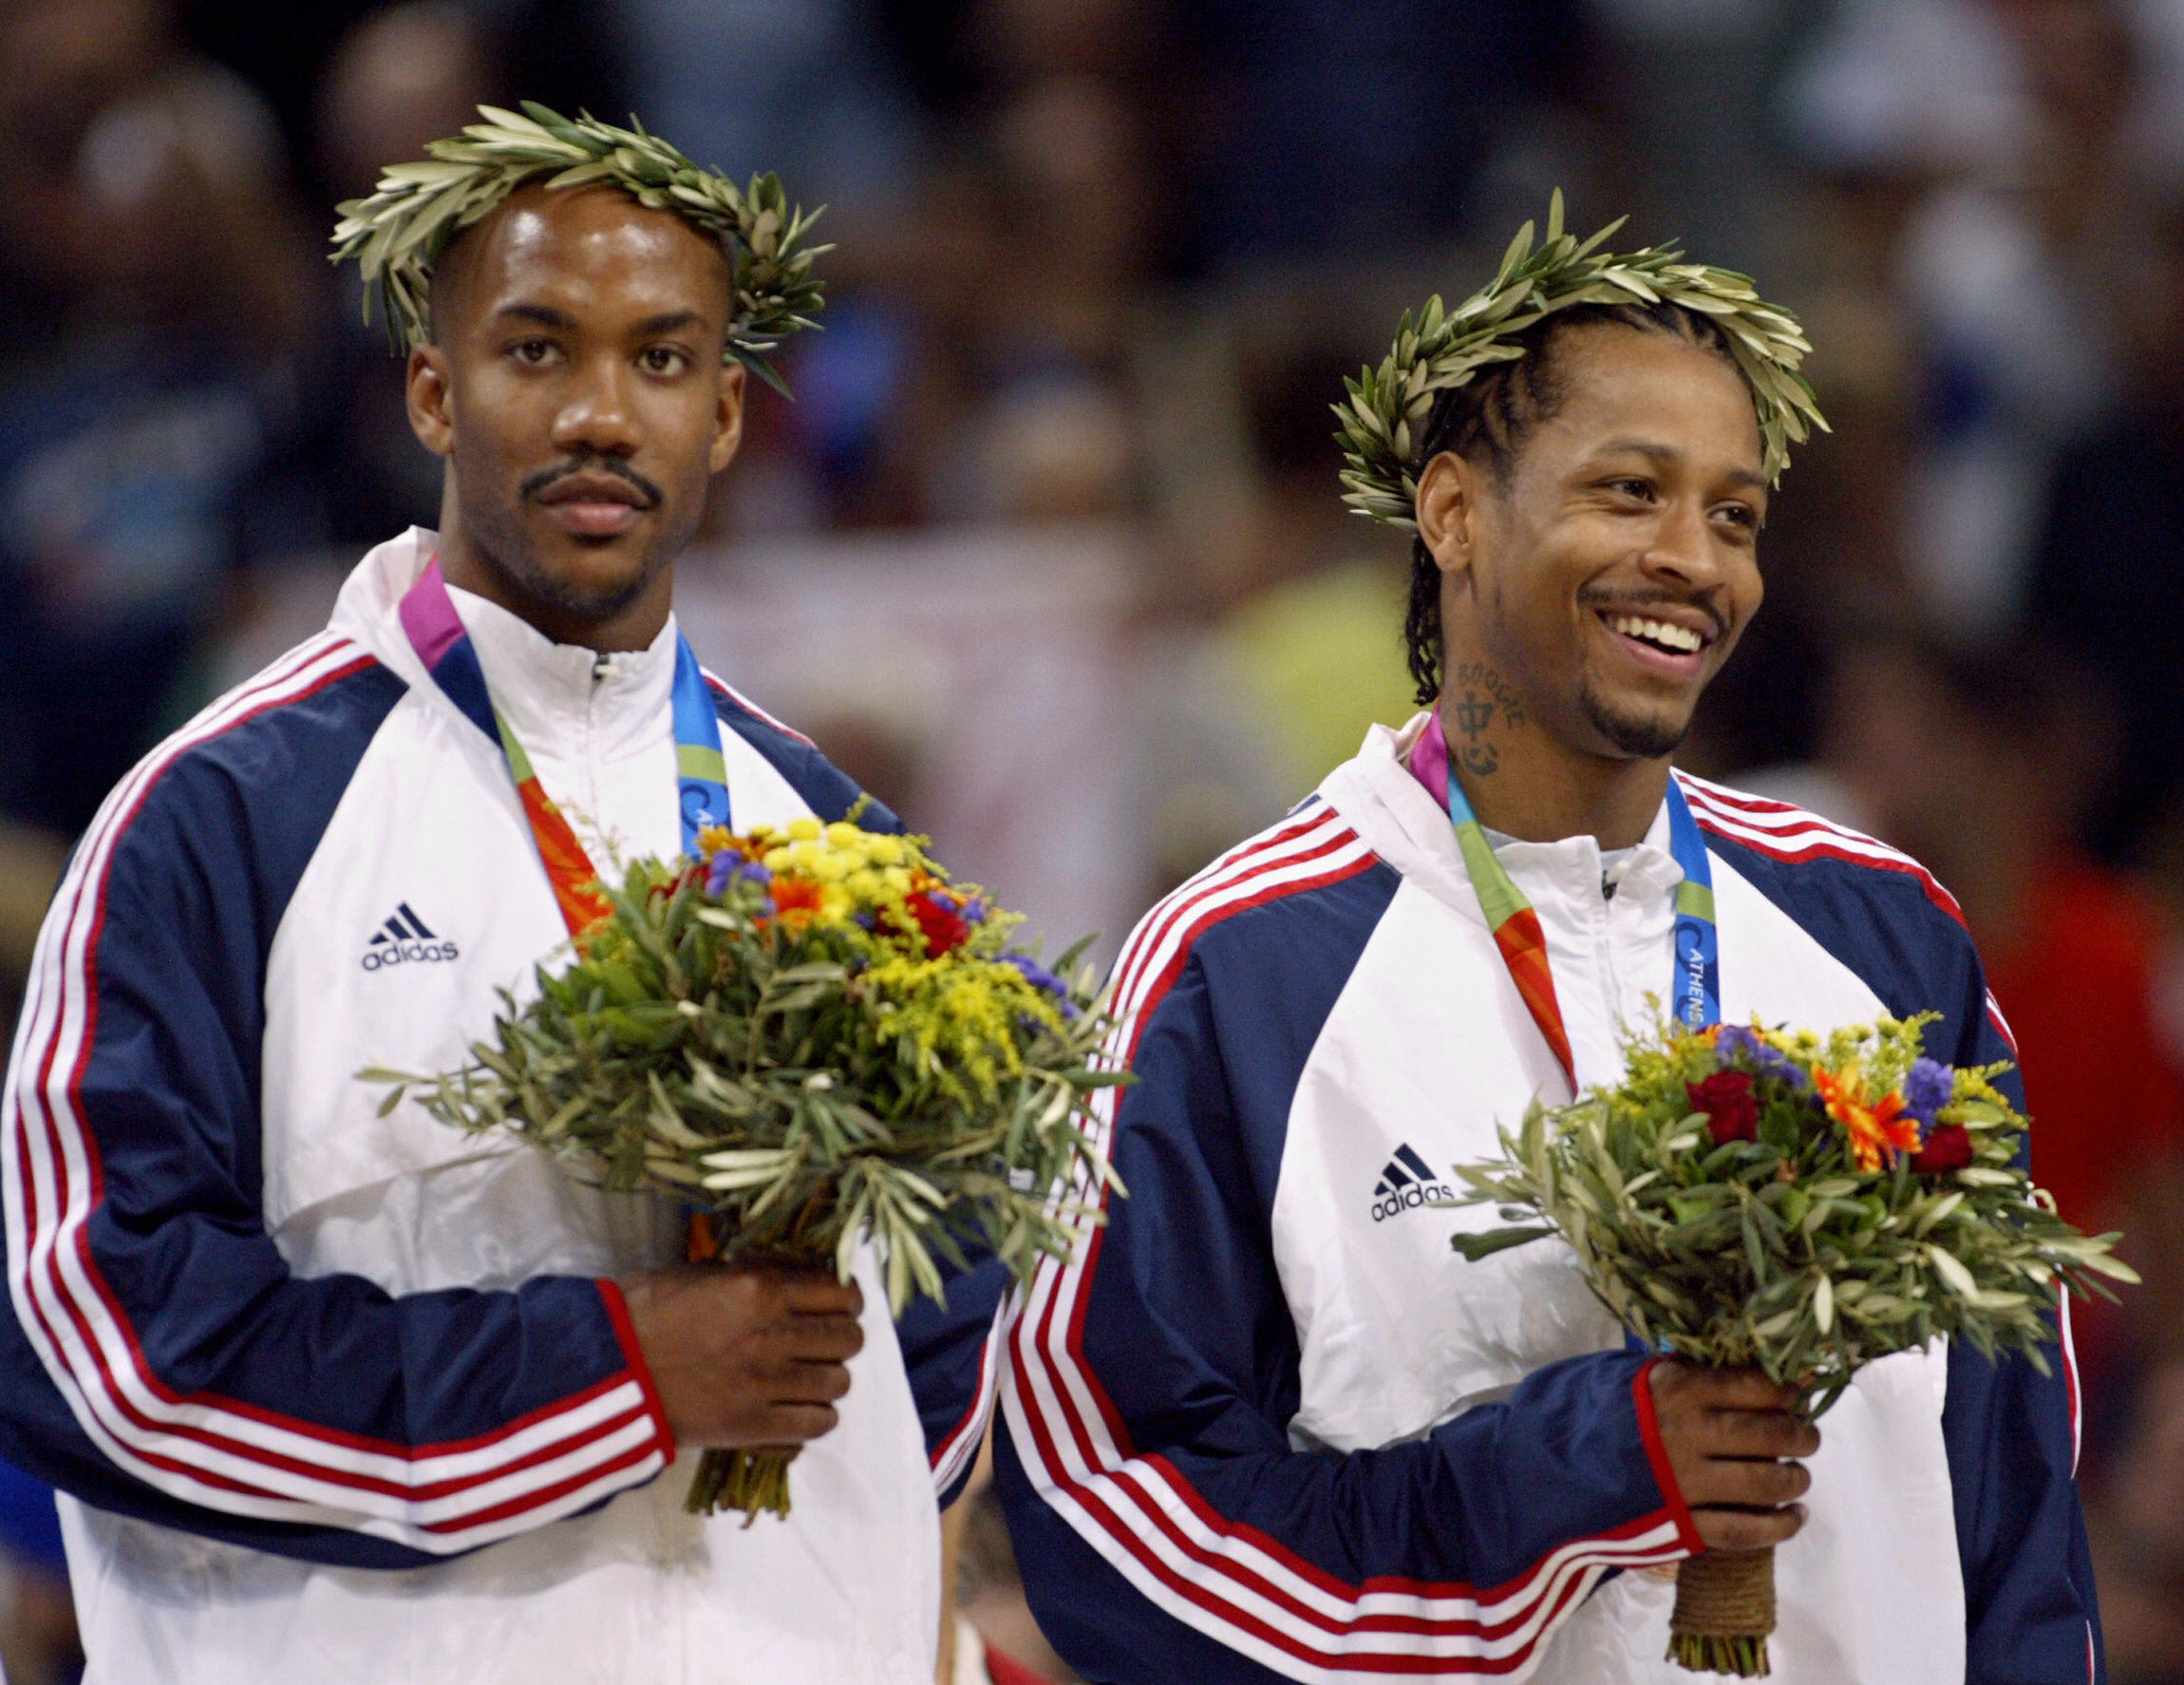 Allen Iverson At The 2004 Olympics